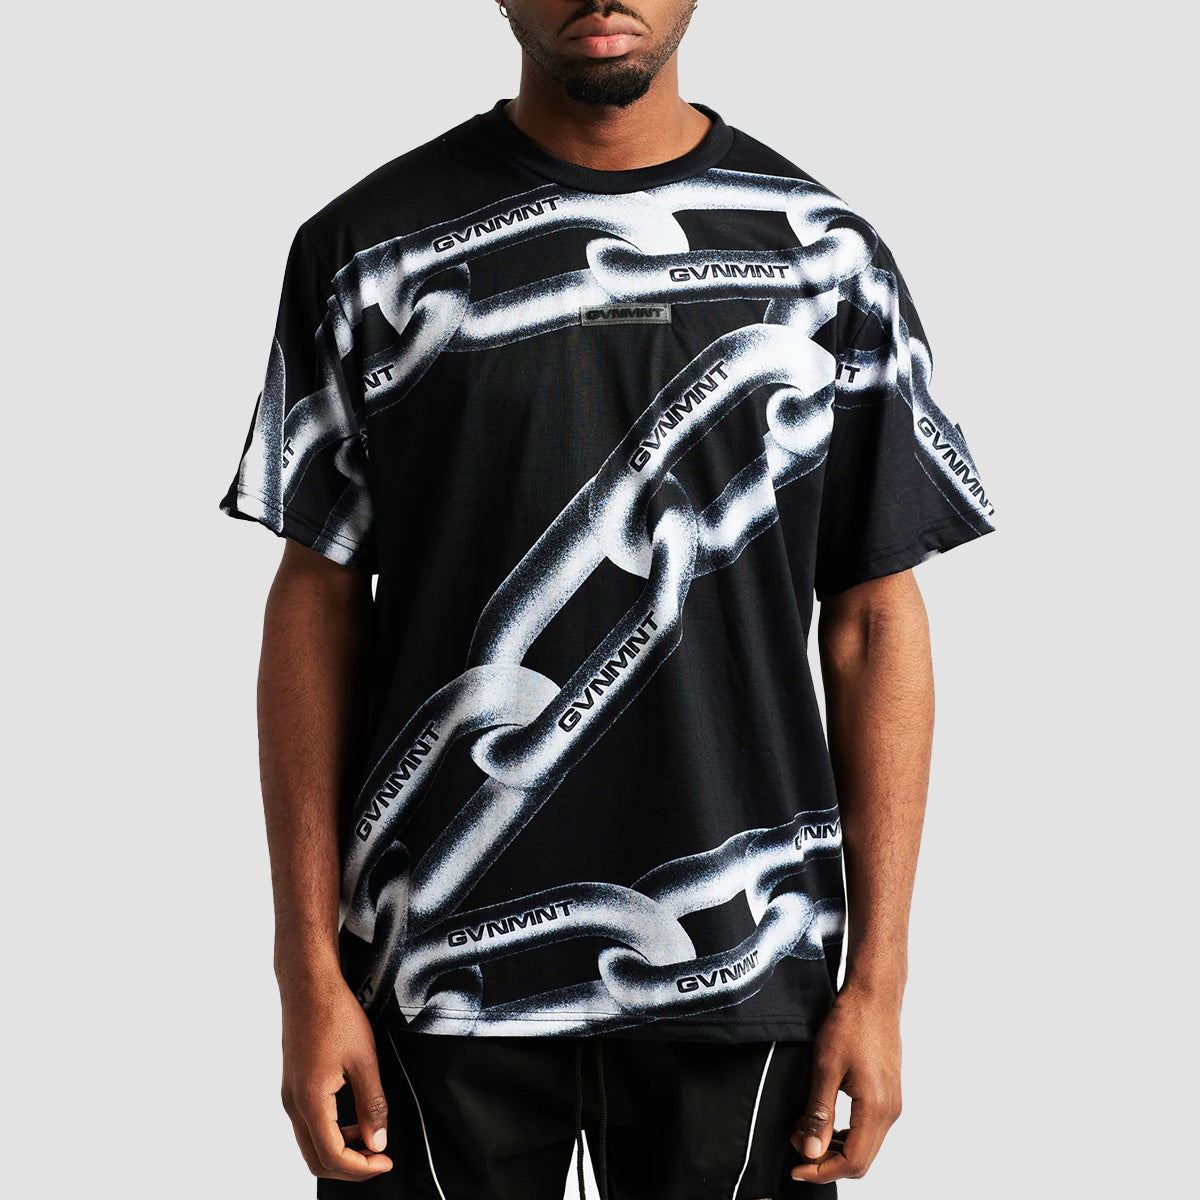 GVNMNT Chained T-Shirt Black